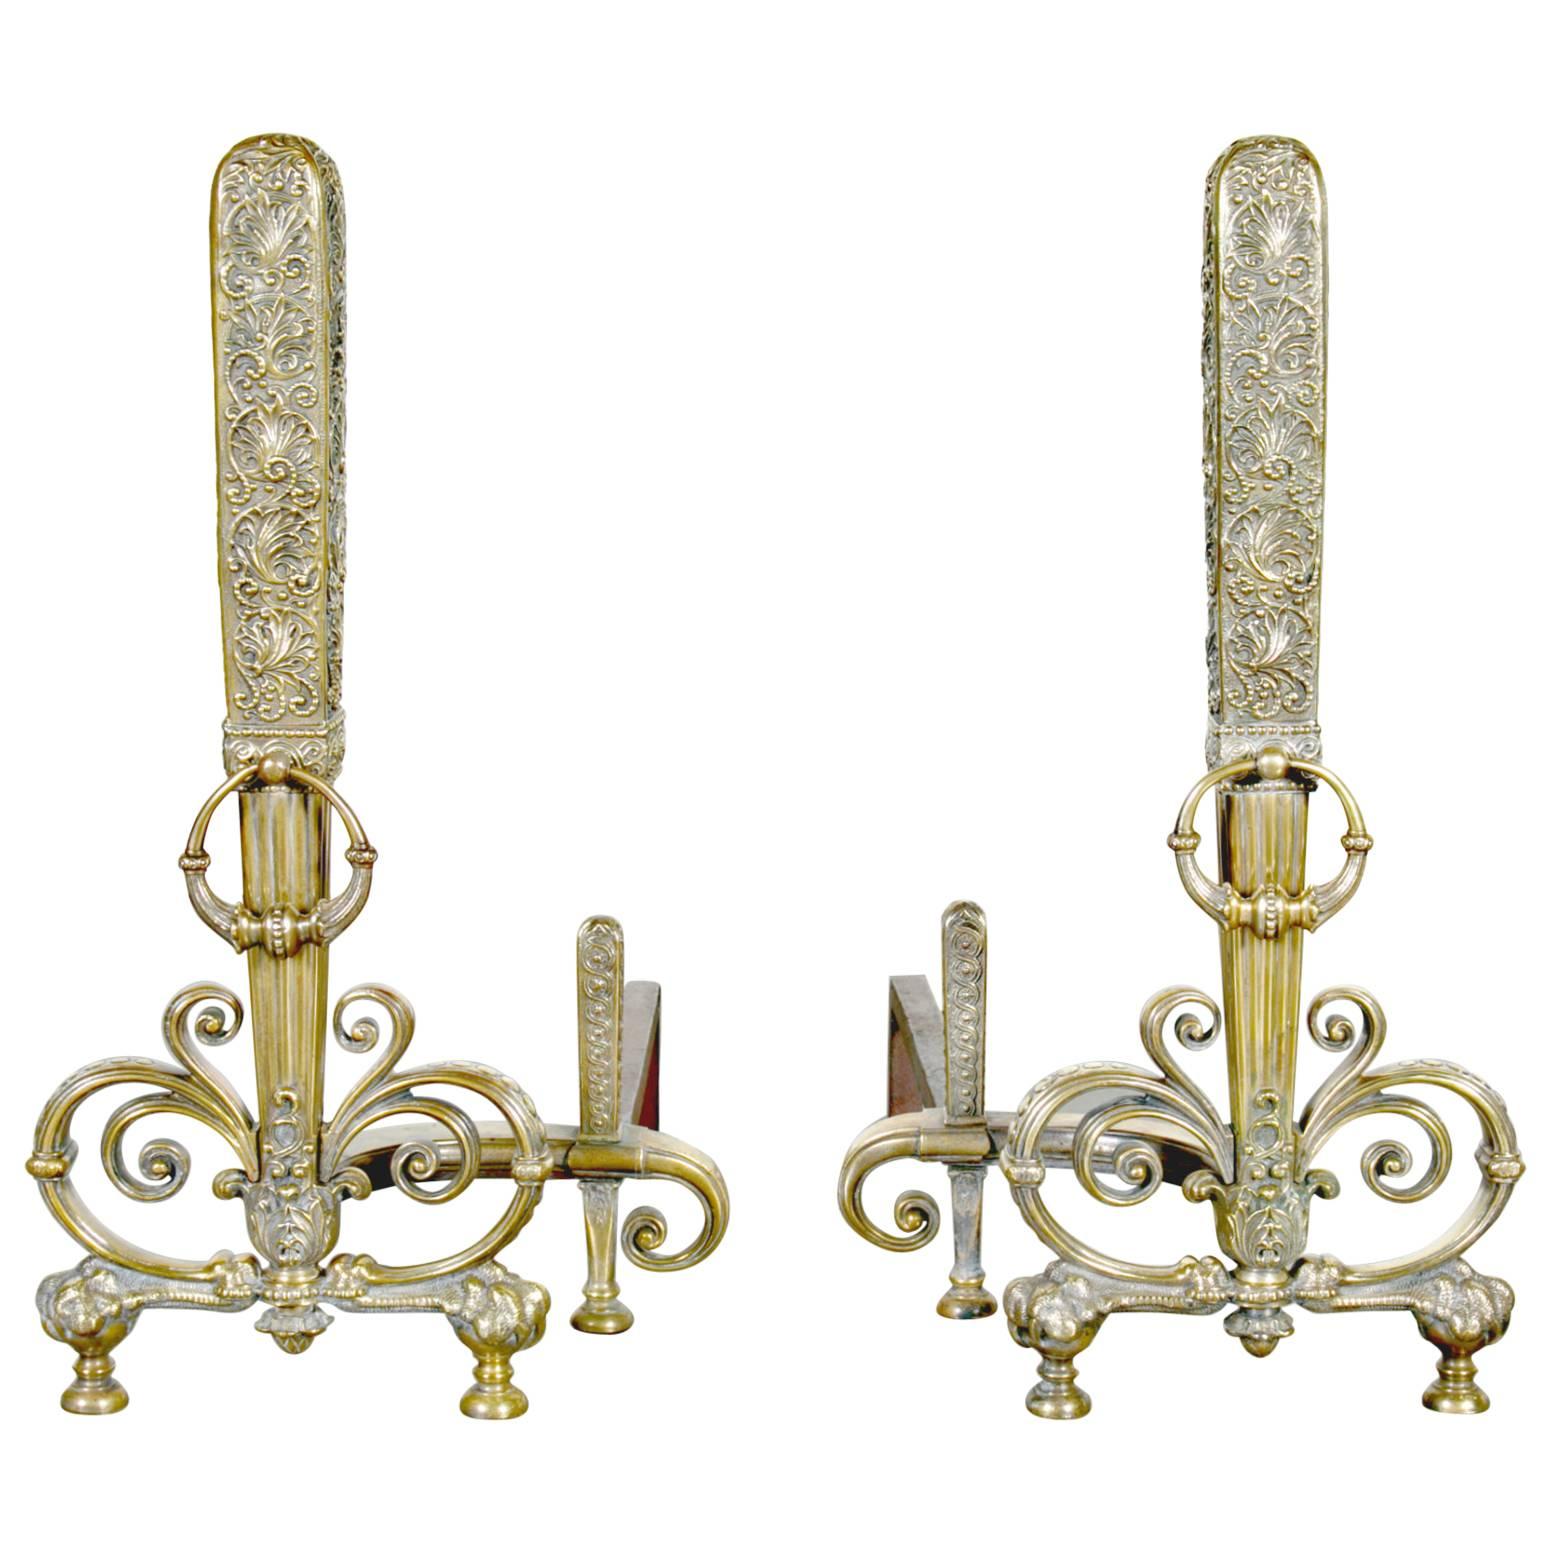 Fine Pair of Brass and Wrought Iron Andirons Attributed to Tiffany Studios For Sale